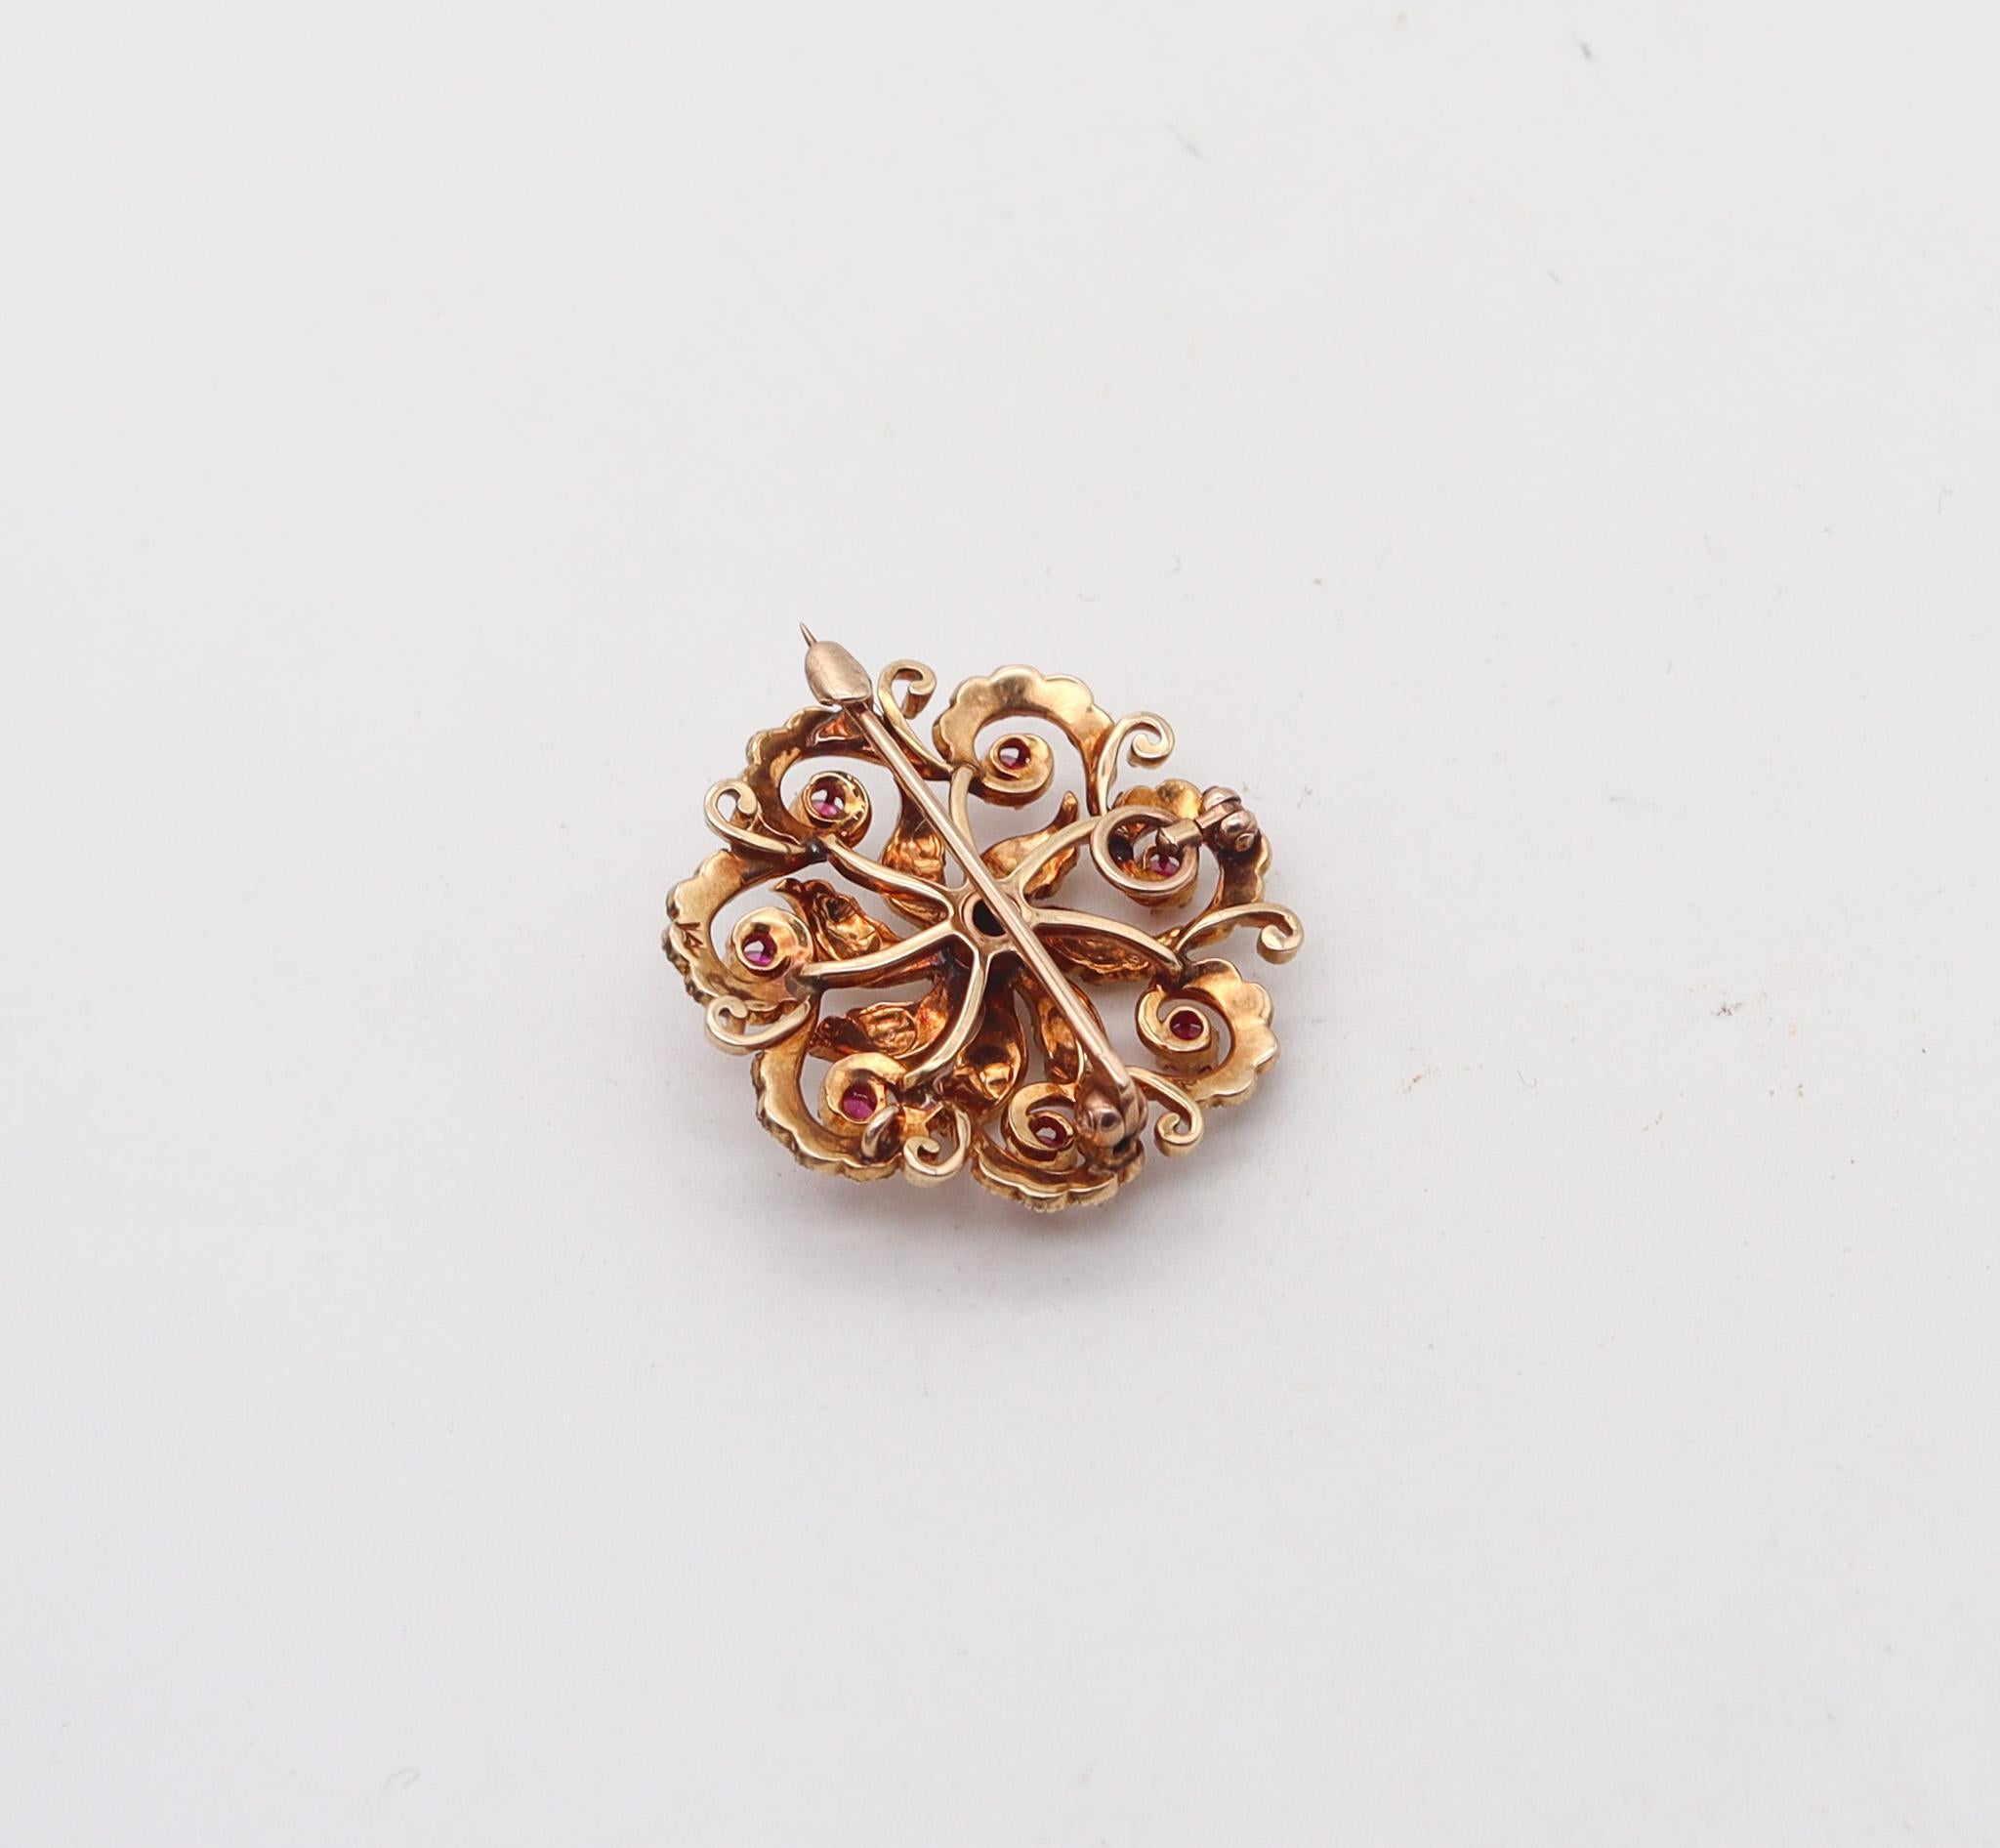 Round Cut Victorian 1890 Convertible Pendant & Brooch Solid 14Kt Gold With Pearls & Rubies For Sale